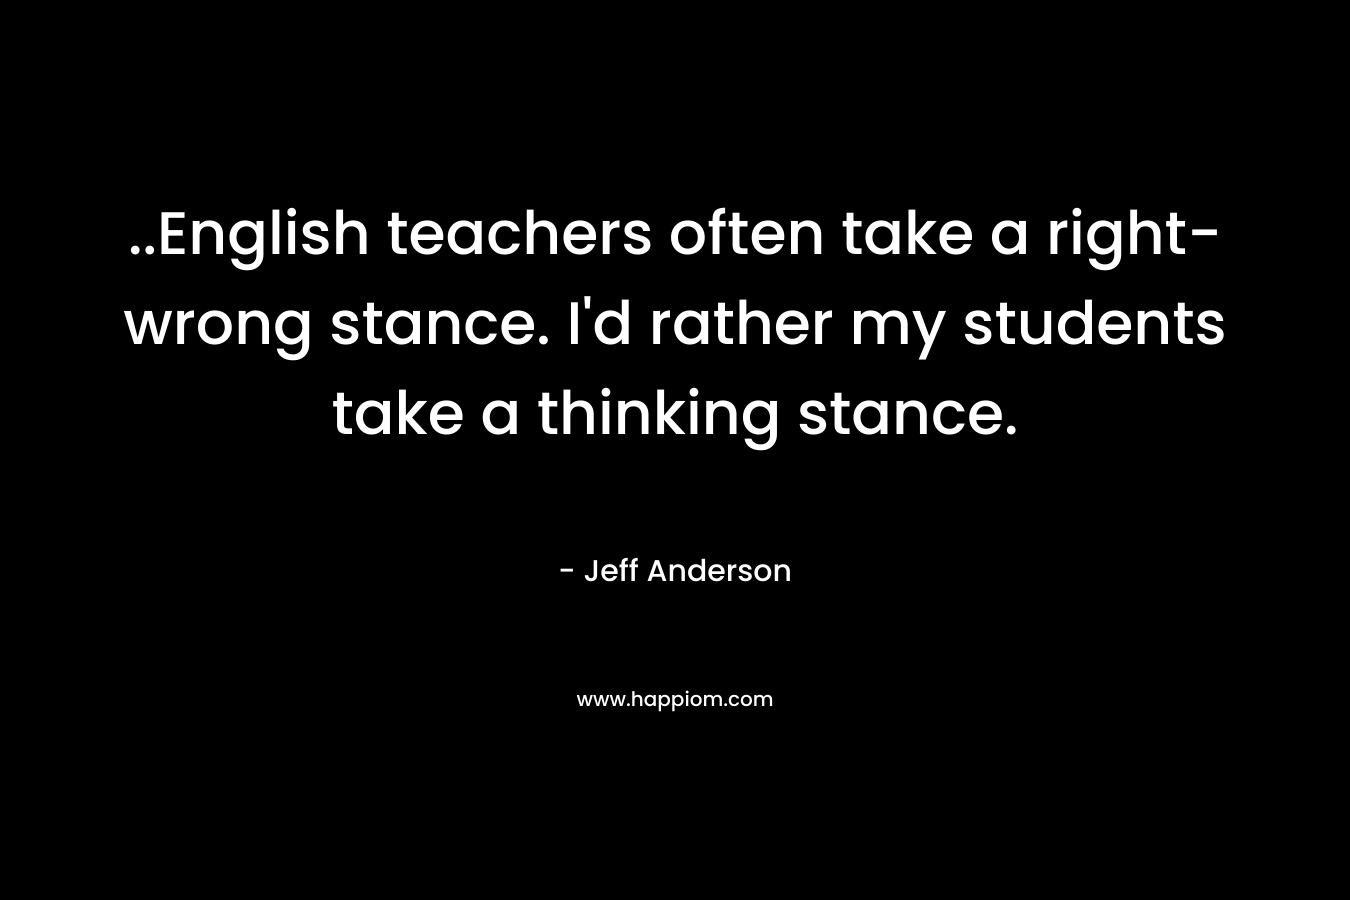 ..English teachers often take a right-wrong stance. I'd rather my students take a thinking stance.